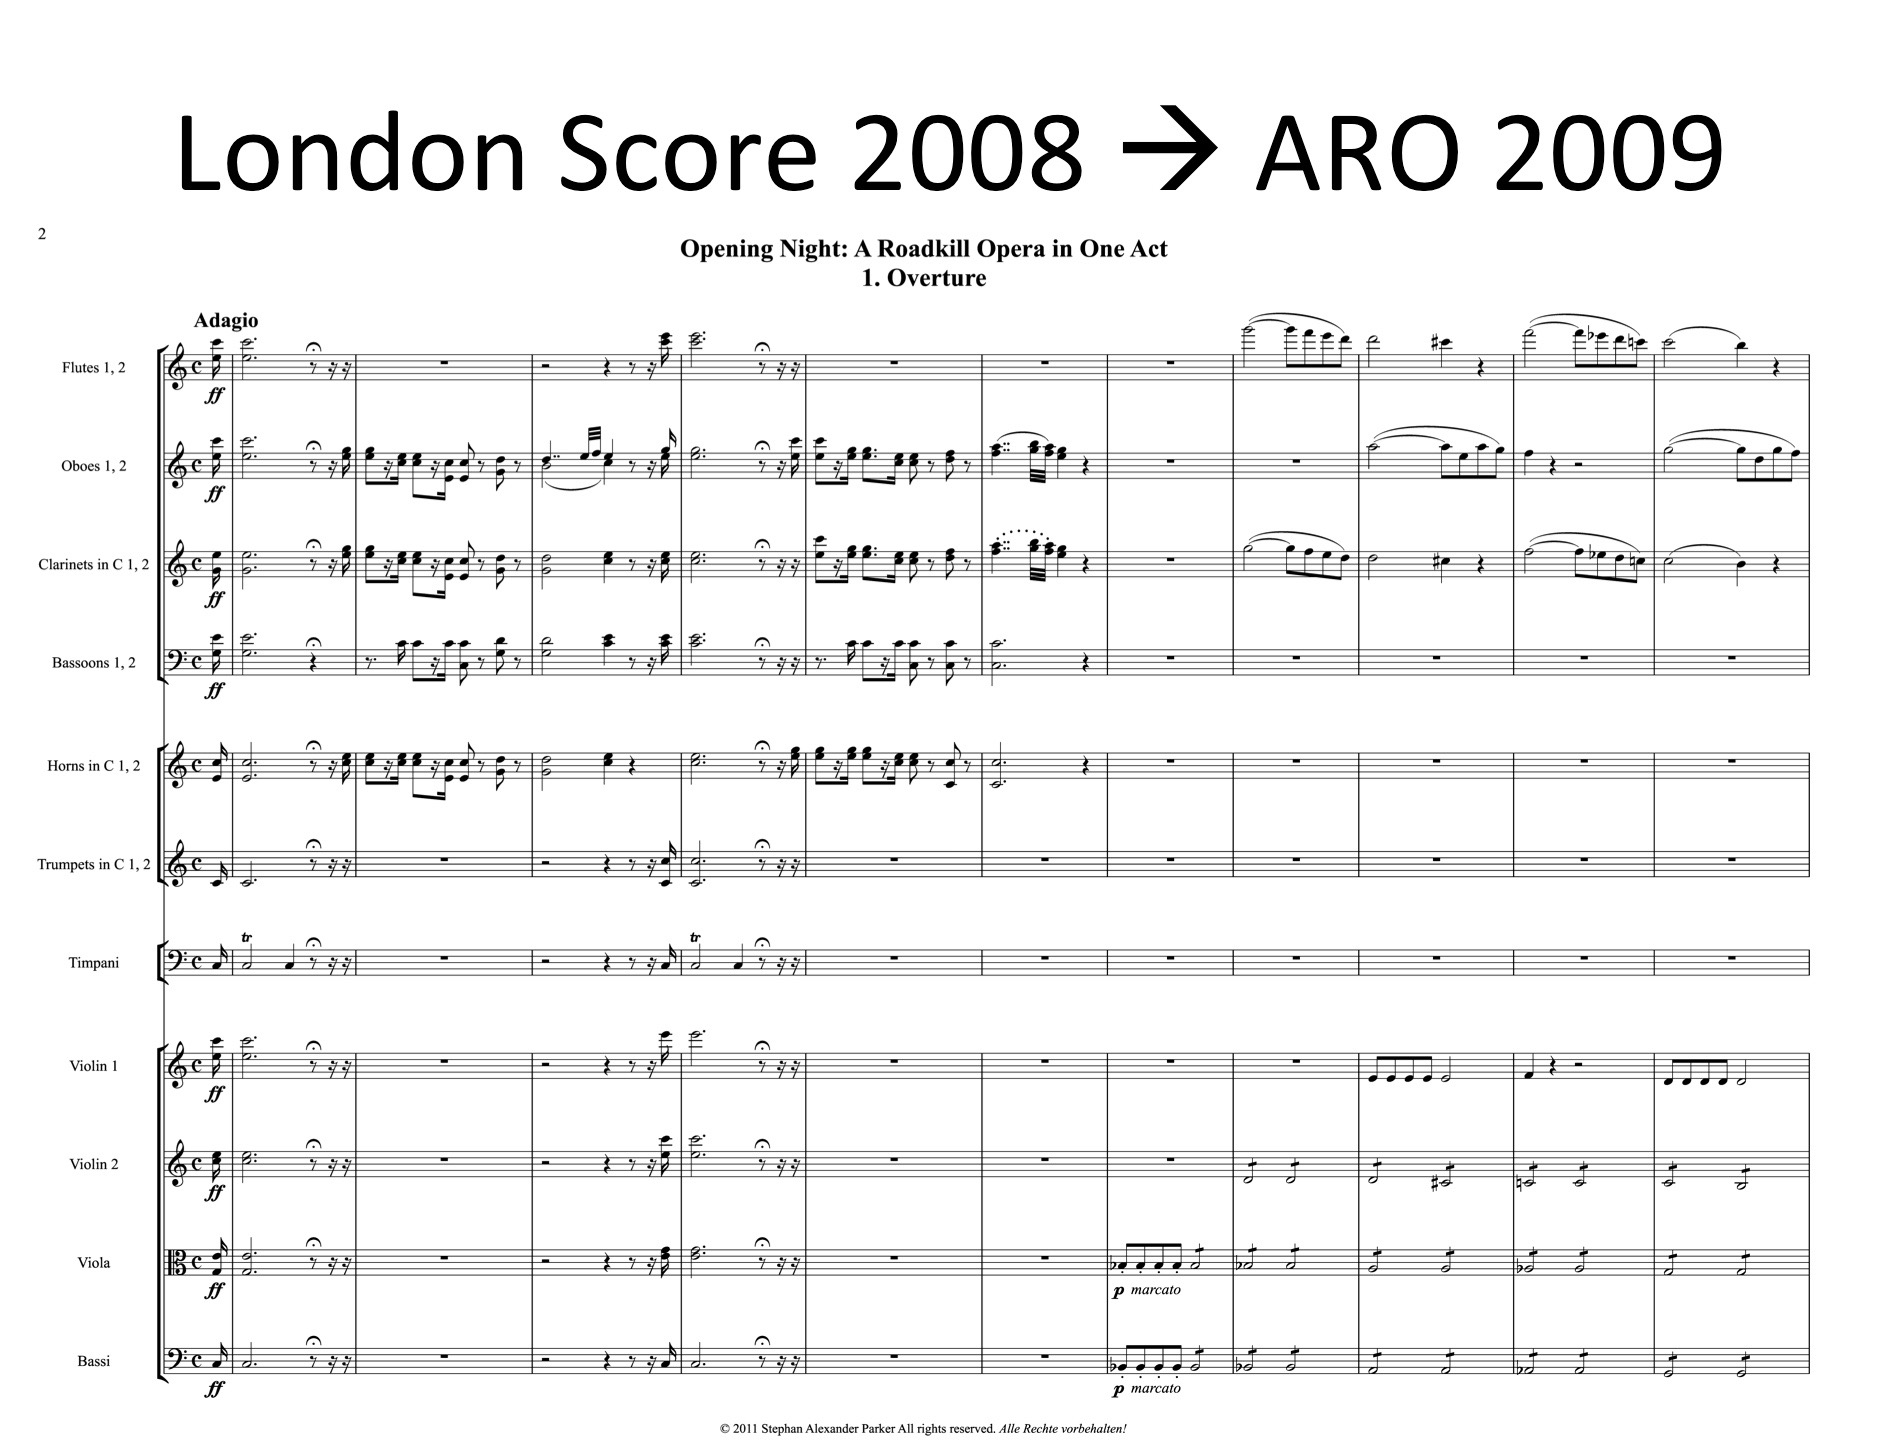 Photo of the computer-generated first 8 bars of the overture from Leonara now renamed at the overture for Opening Night: A Roadkill Opera in One Act along with a caption that says London Score 2008 (arrow pointing to the right) ARO (A Roadkill Opera) 2009